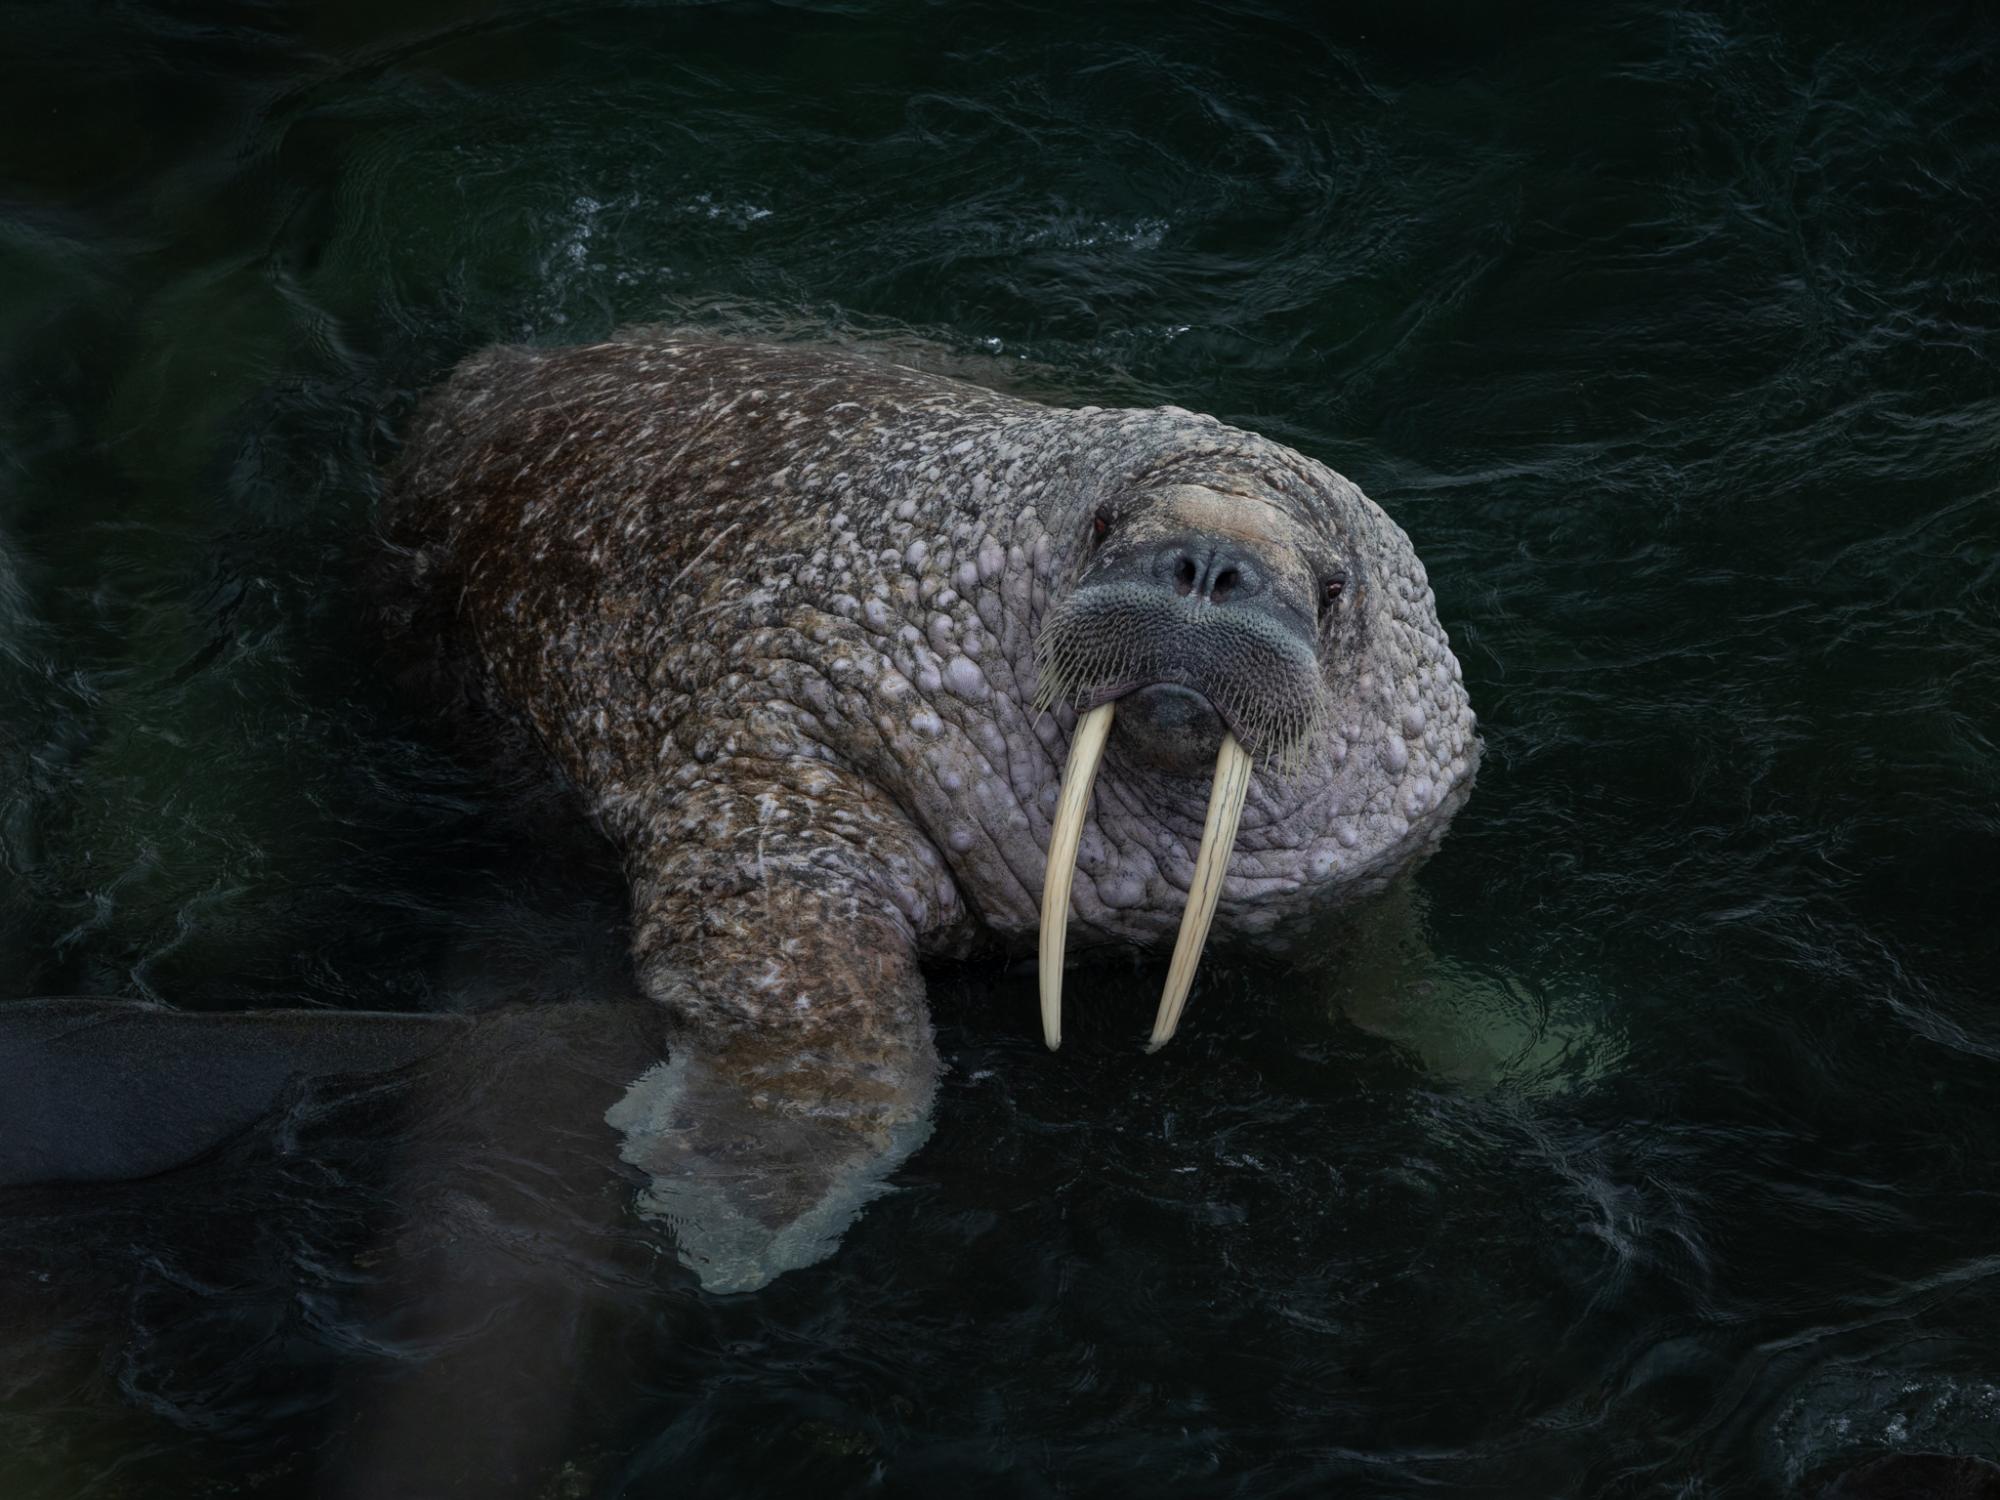 A male Pacific walrus wallows in the shallow waters off Round Island, Alaska. His skin, pale in color from prolonged immersion in the icy Bering Sea, will quickly redden when he comes ashore into warmer conditions and blood returns to his extremities.